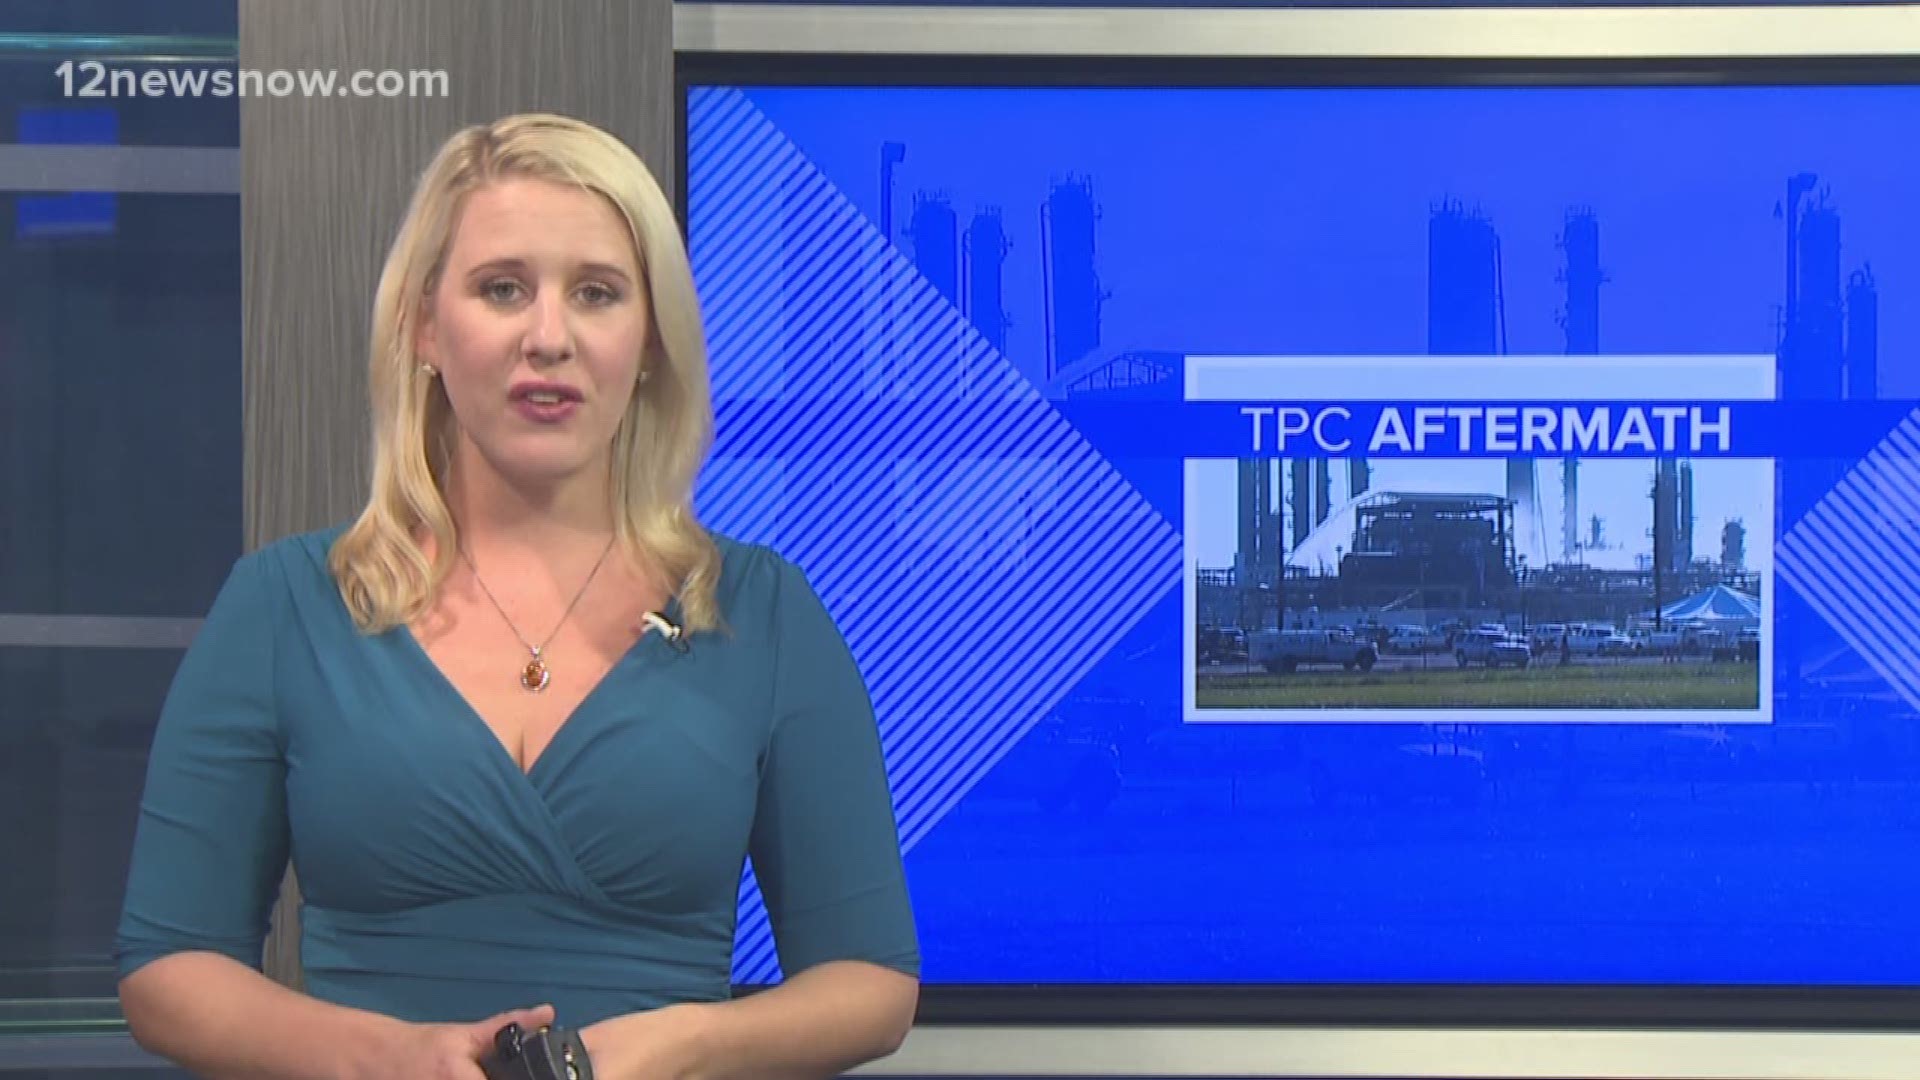 Officials say the goal is to stabilize all chemicals at the plant and move them. Monday, TPC said workers started using DEHA to stabilize chemicals in 11 tanks.